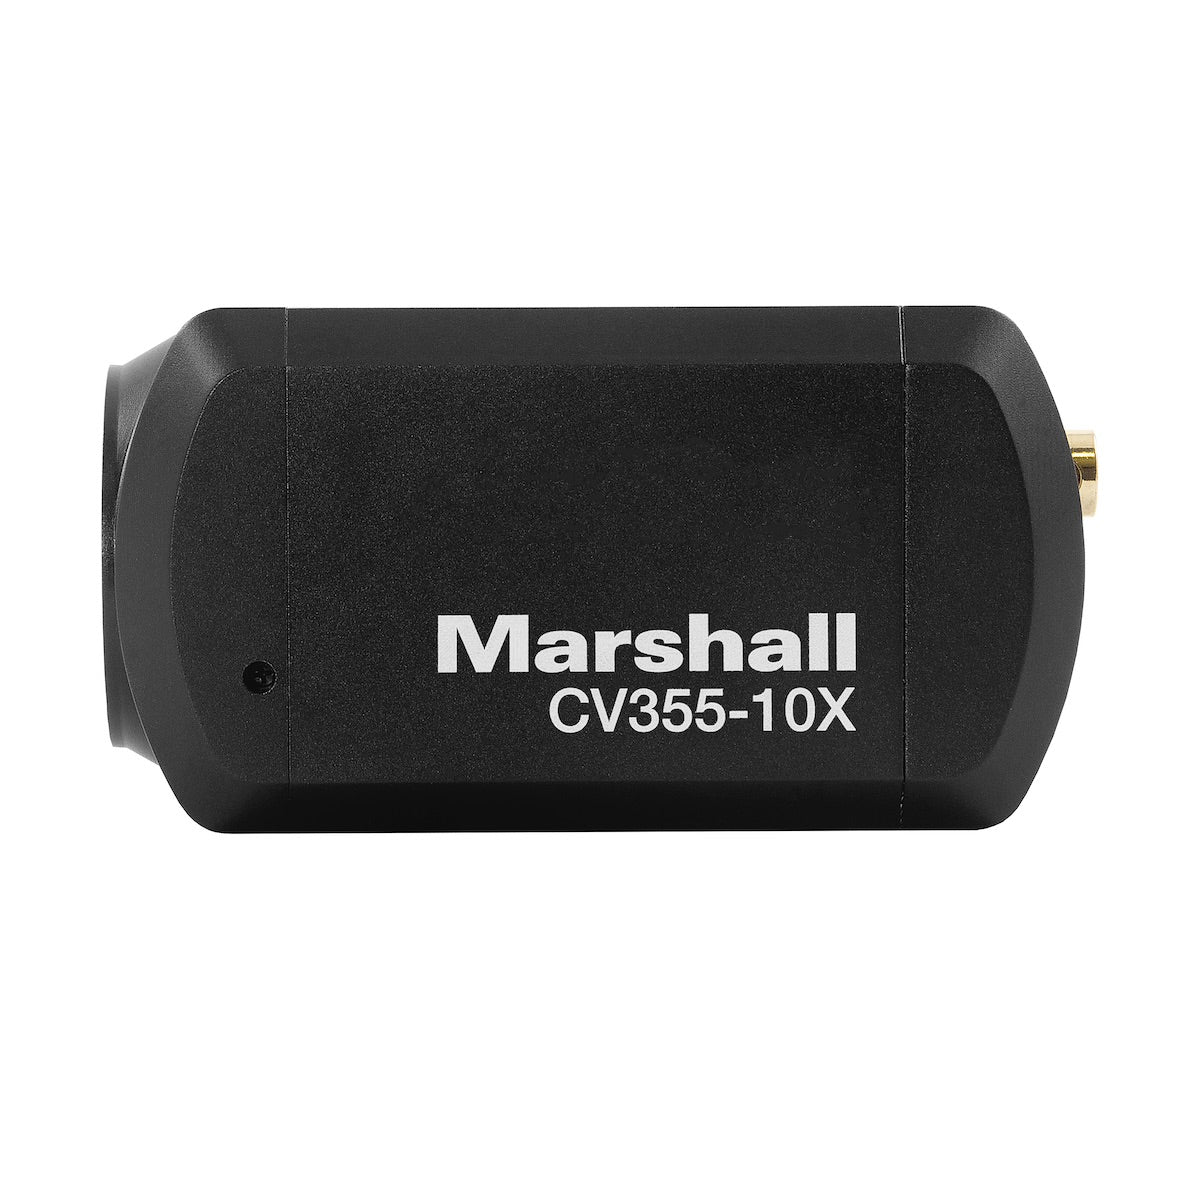 Marshall CV355-10X - Compact HD Video Camera with 3GSDI/HDMI outputs and 10x Optical Zoom, left side